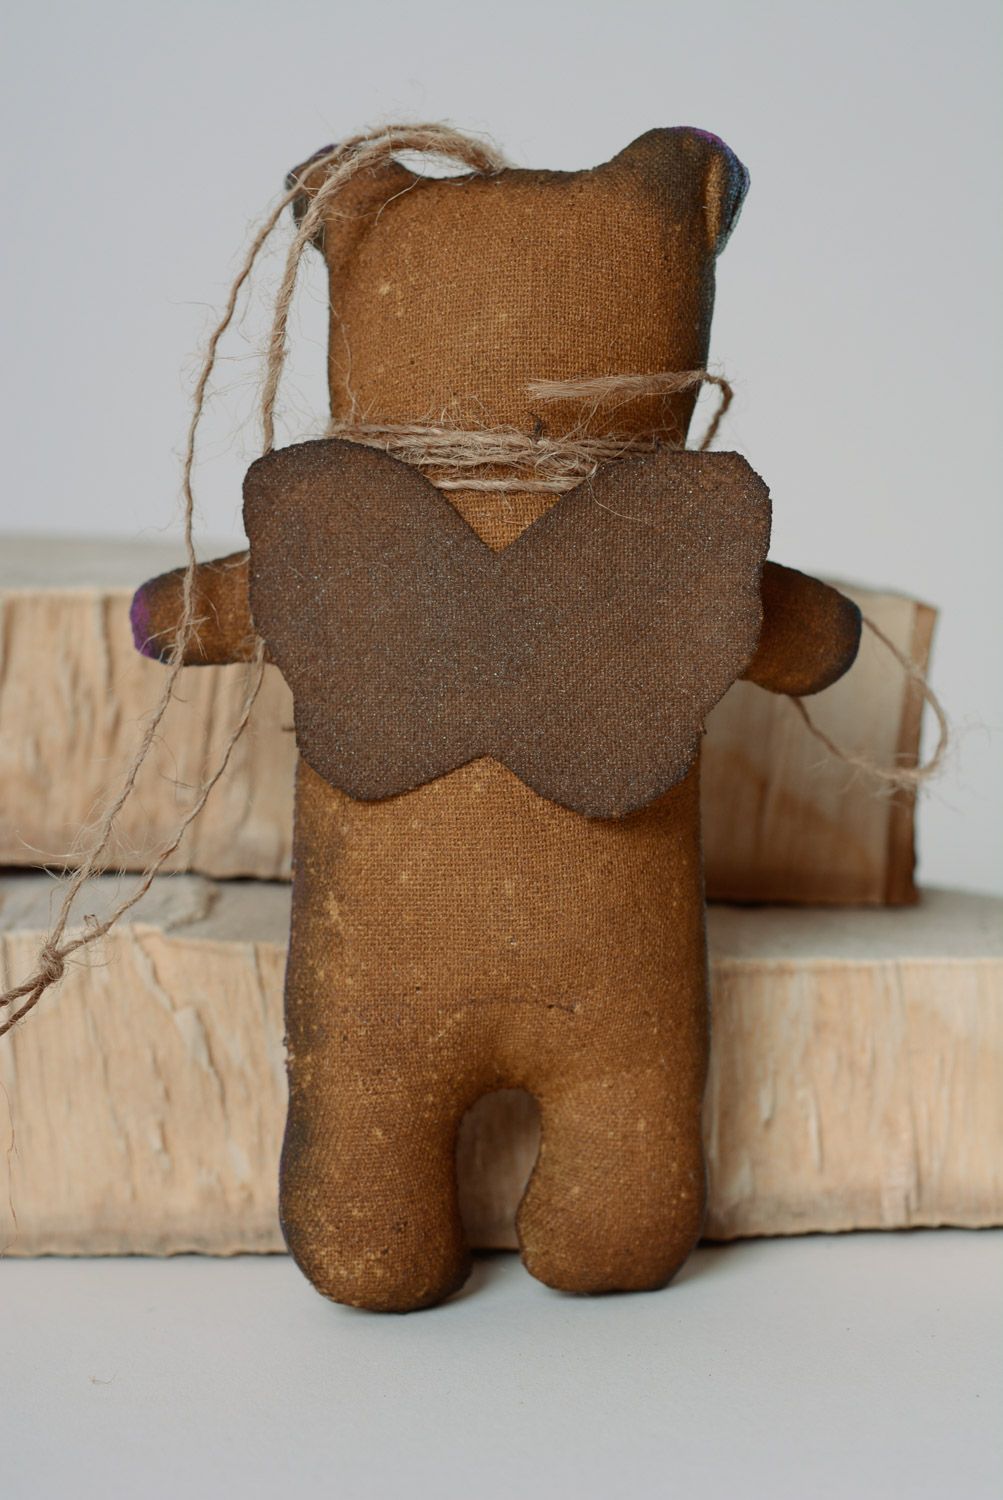 Handmade interior hanging soft toy sewn of cotton soaked with coffee bear photo 4